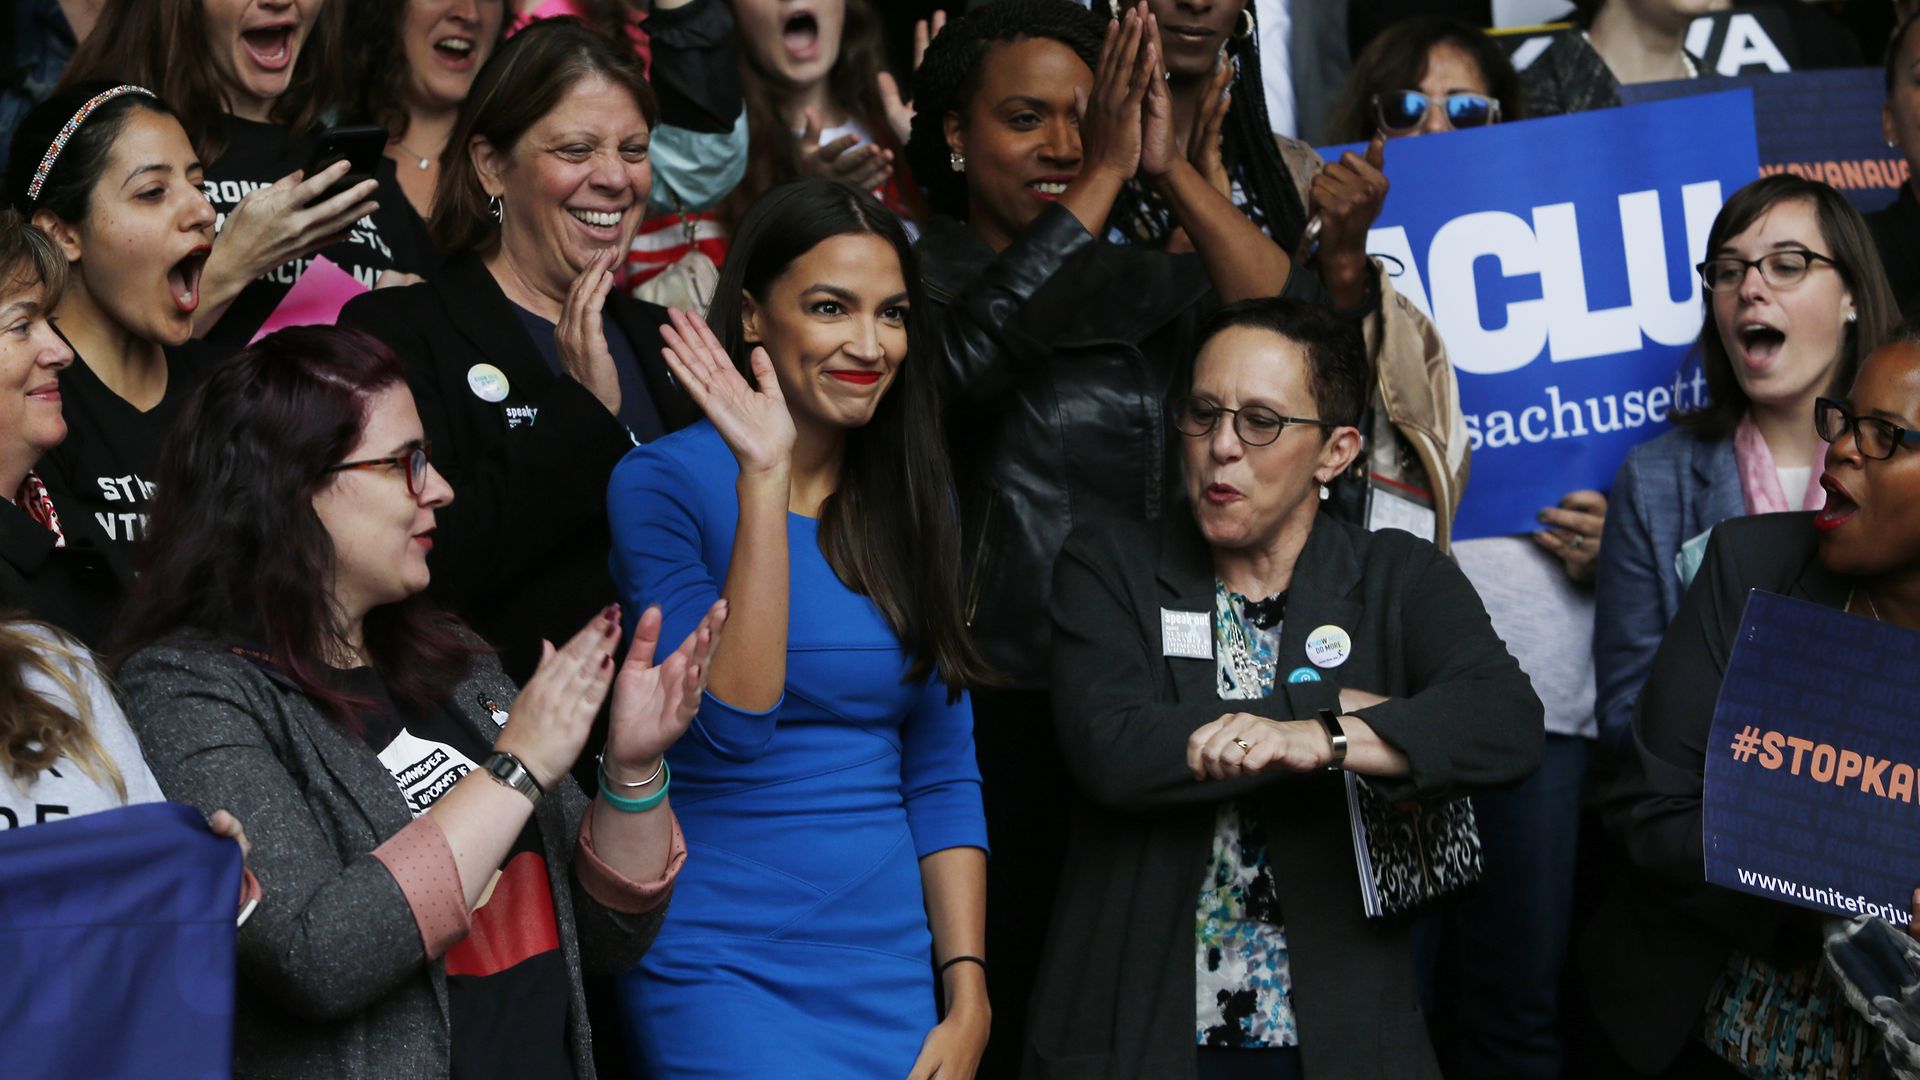 Alexandria Ocasio-Cortez waves in the midst of a crowd wearing a bright blue dress. 